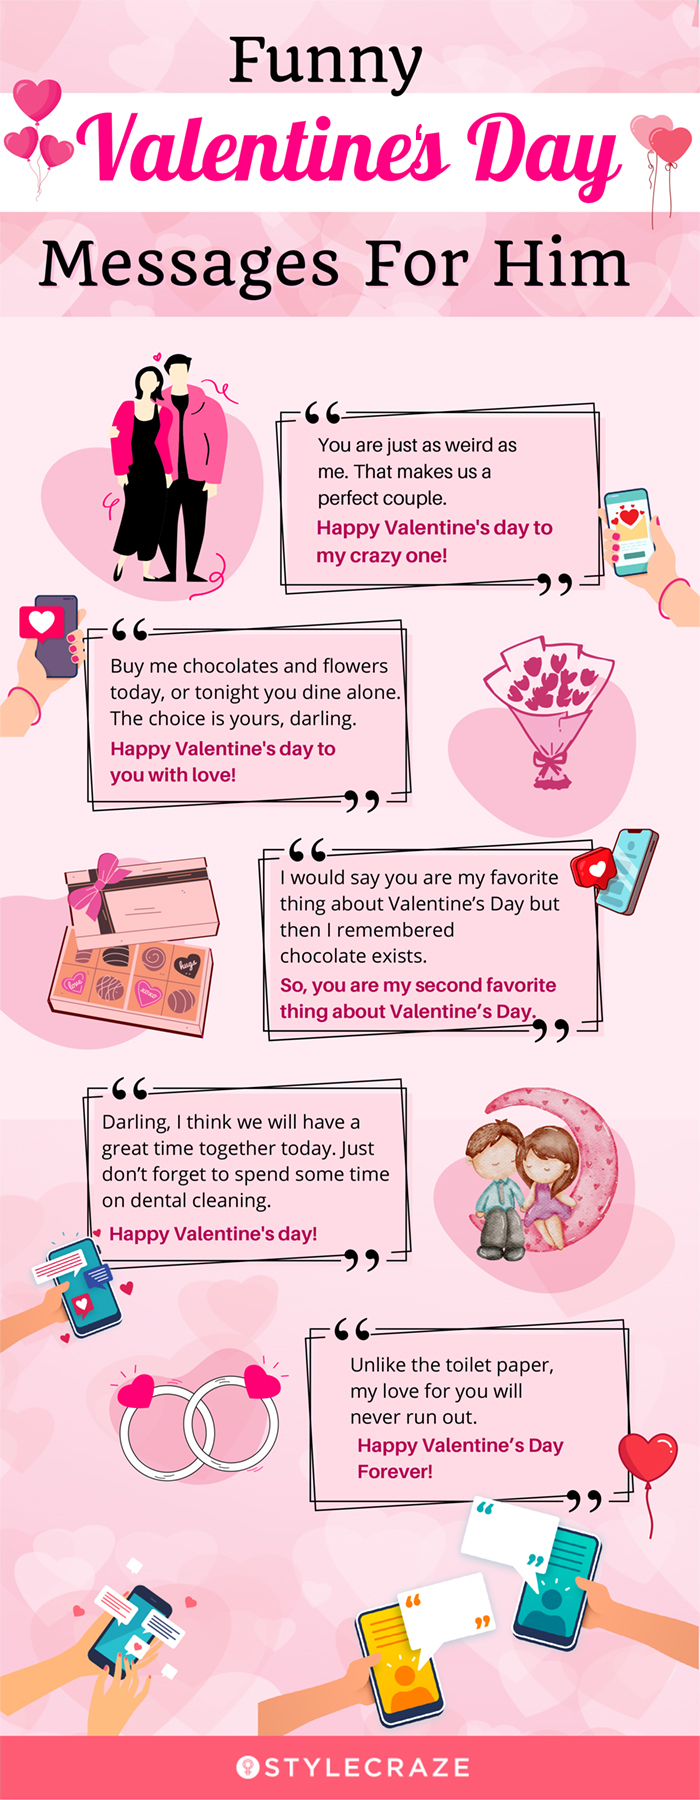 funny valentines day messages for him (infographic)